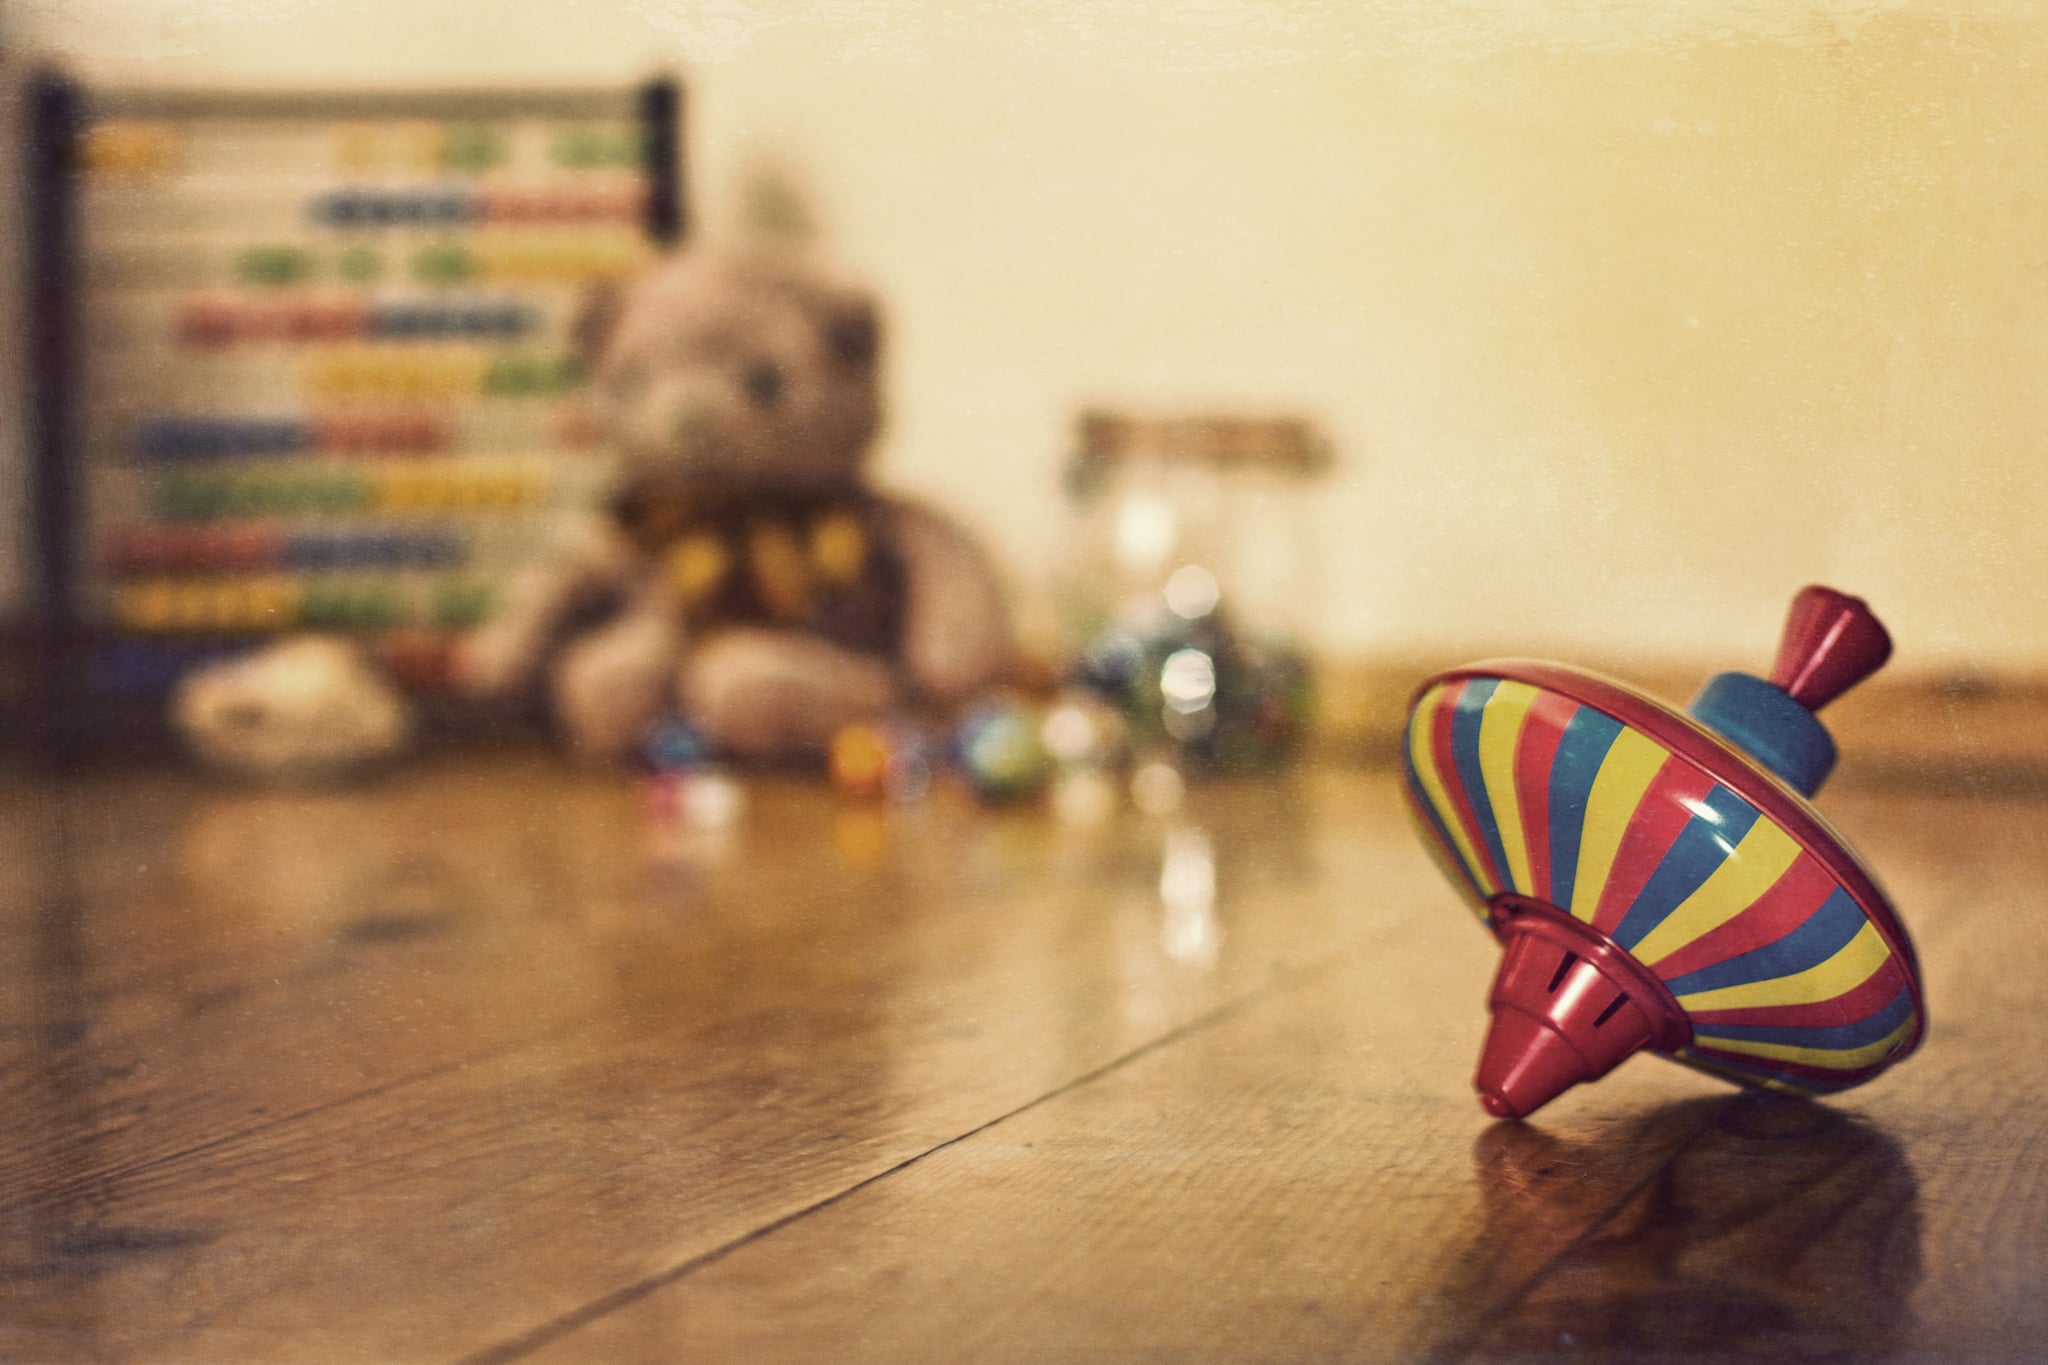 An old fashioned tin spinning top in the foreground with a collection of old fashioned toys in the background including an abacus, teddy bear and marbles.